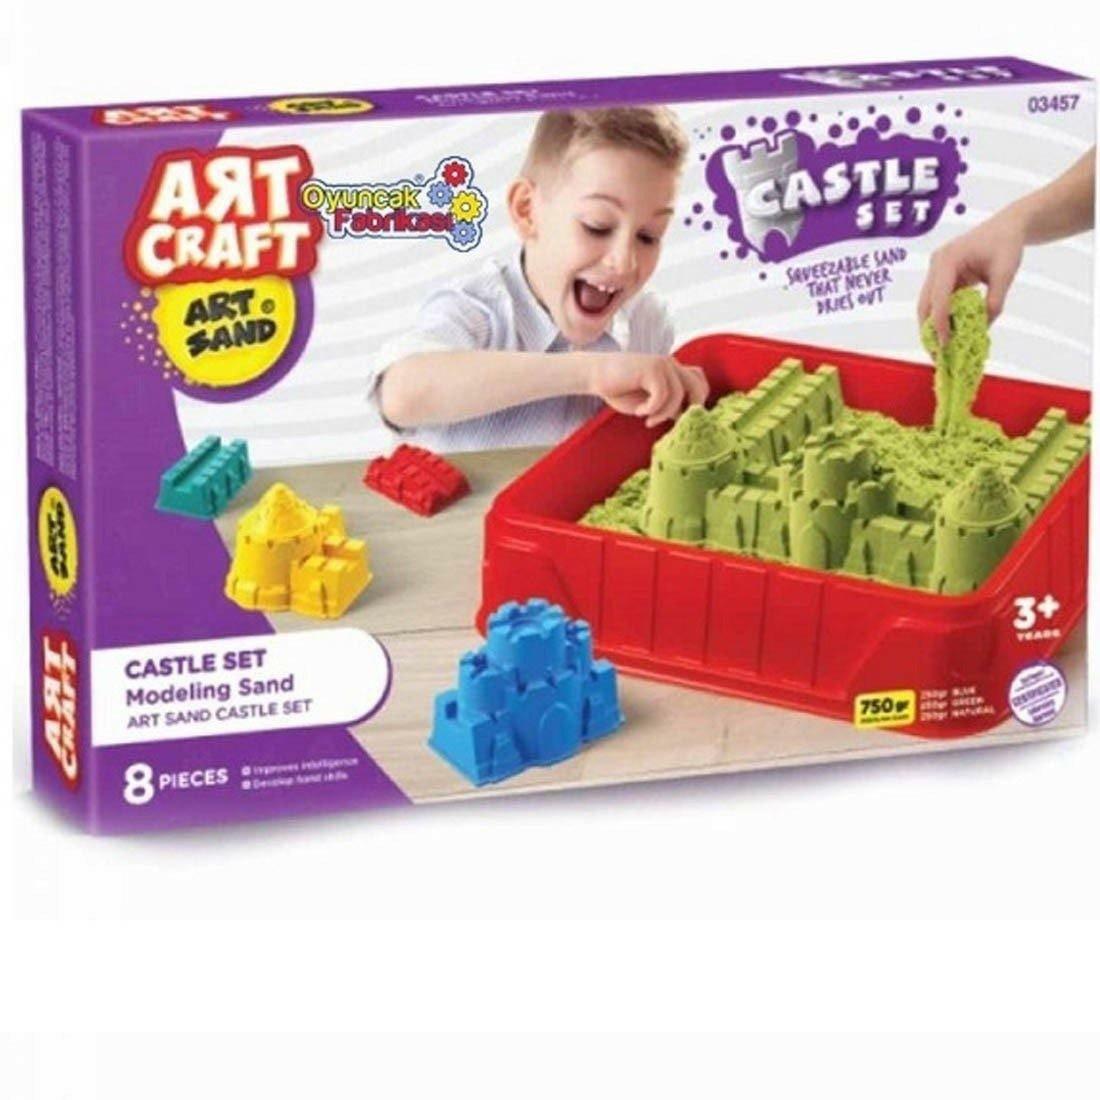 Dede 3457 Art Craft Sand Castle Set 5 Pieces - BumbleToys - 5-7 Years, Boys, Cecil, Girls, Make & Create